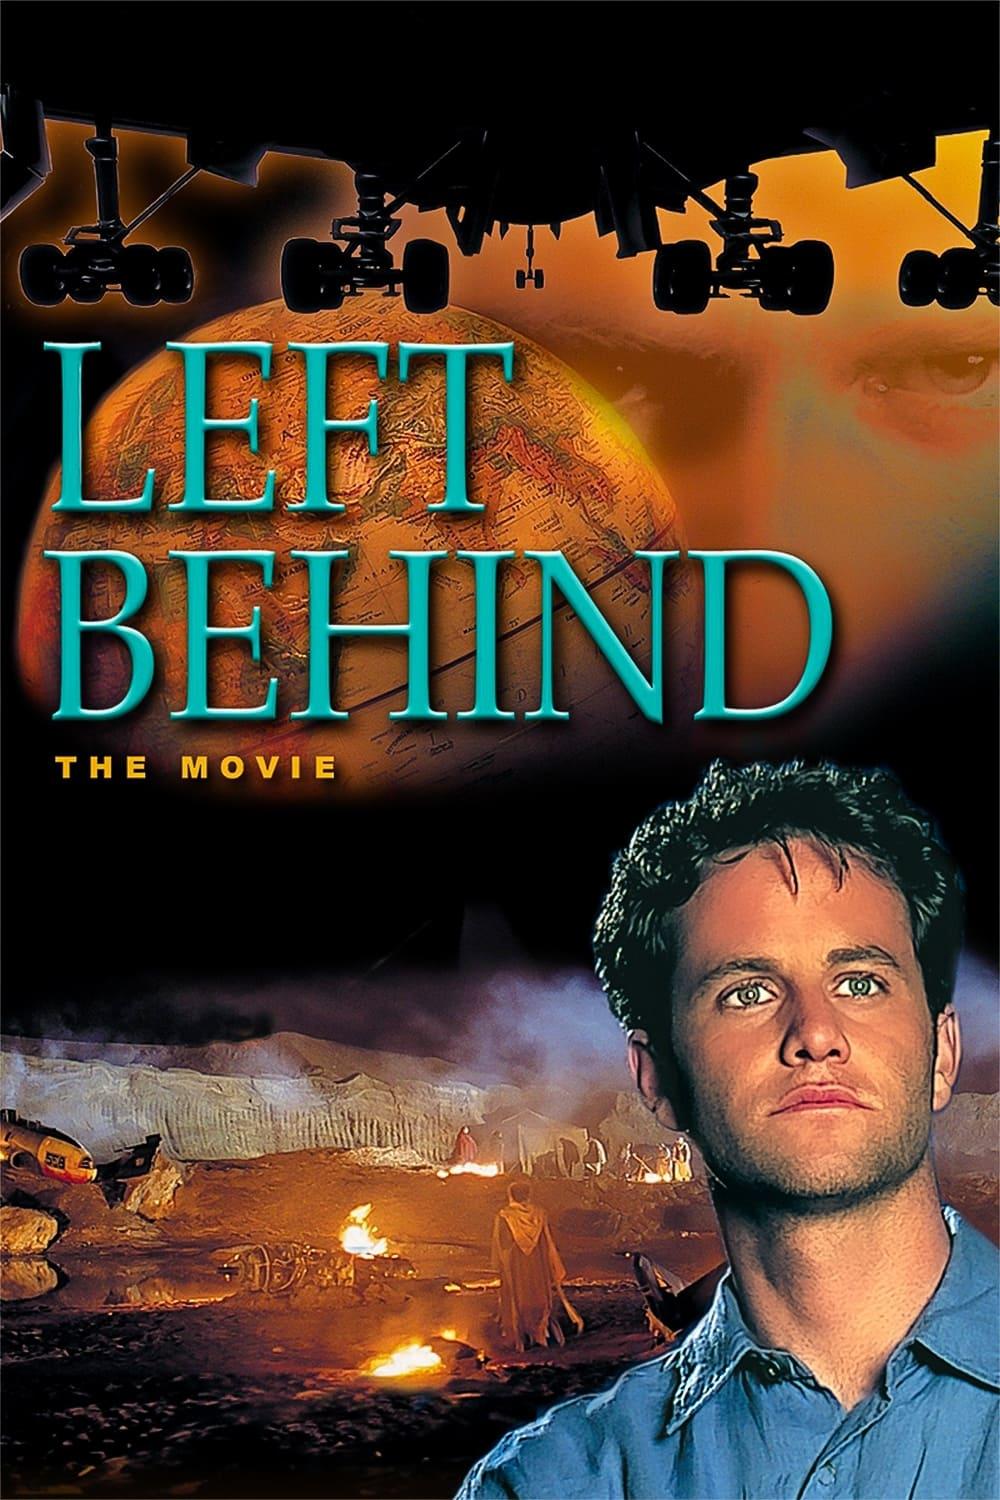 Left Behind: The Movie poster